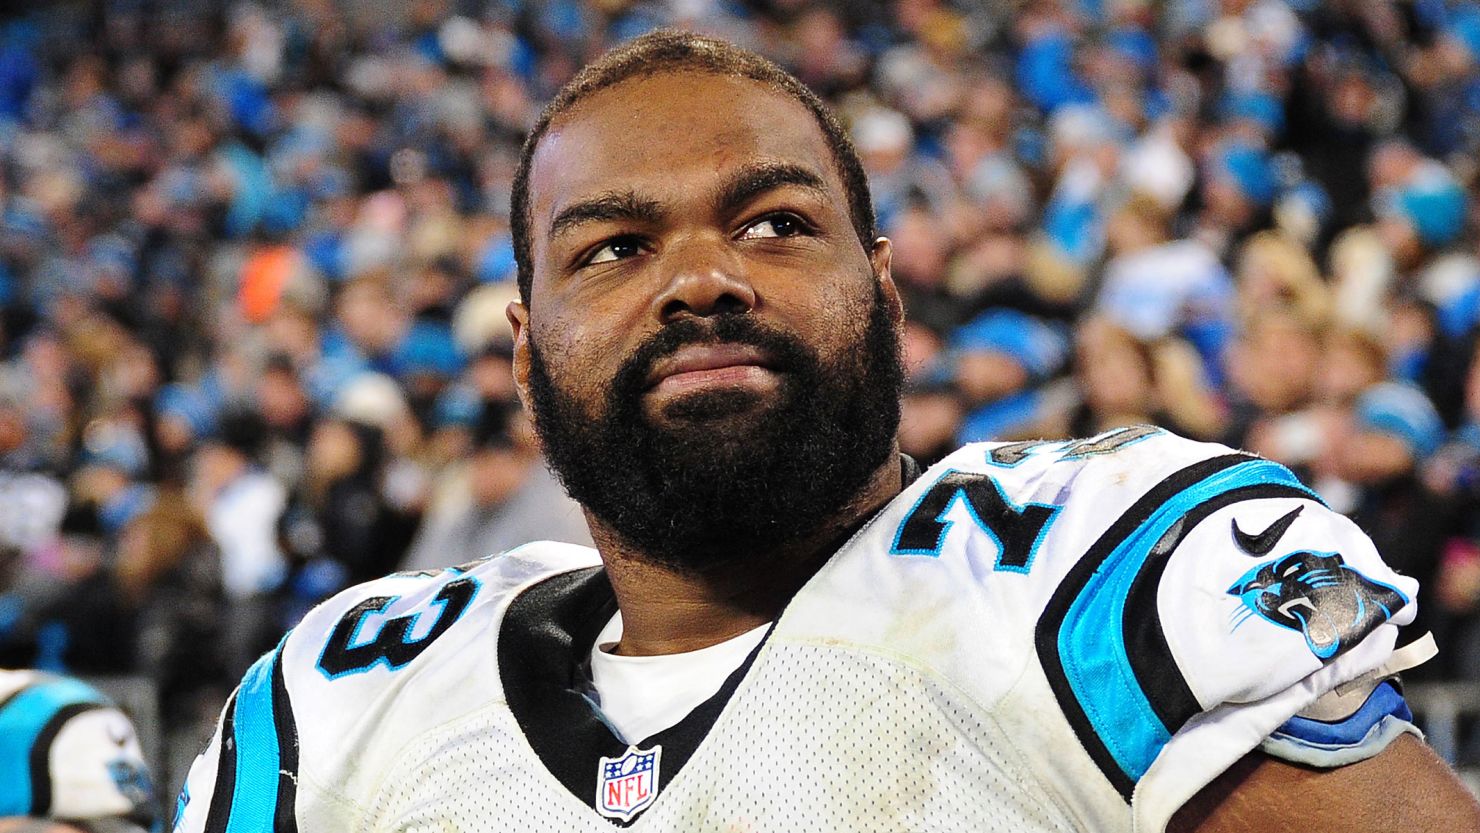 Michael Oher was paid $138,000 from 'The Blind Side' movie and